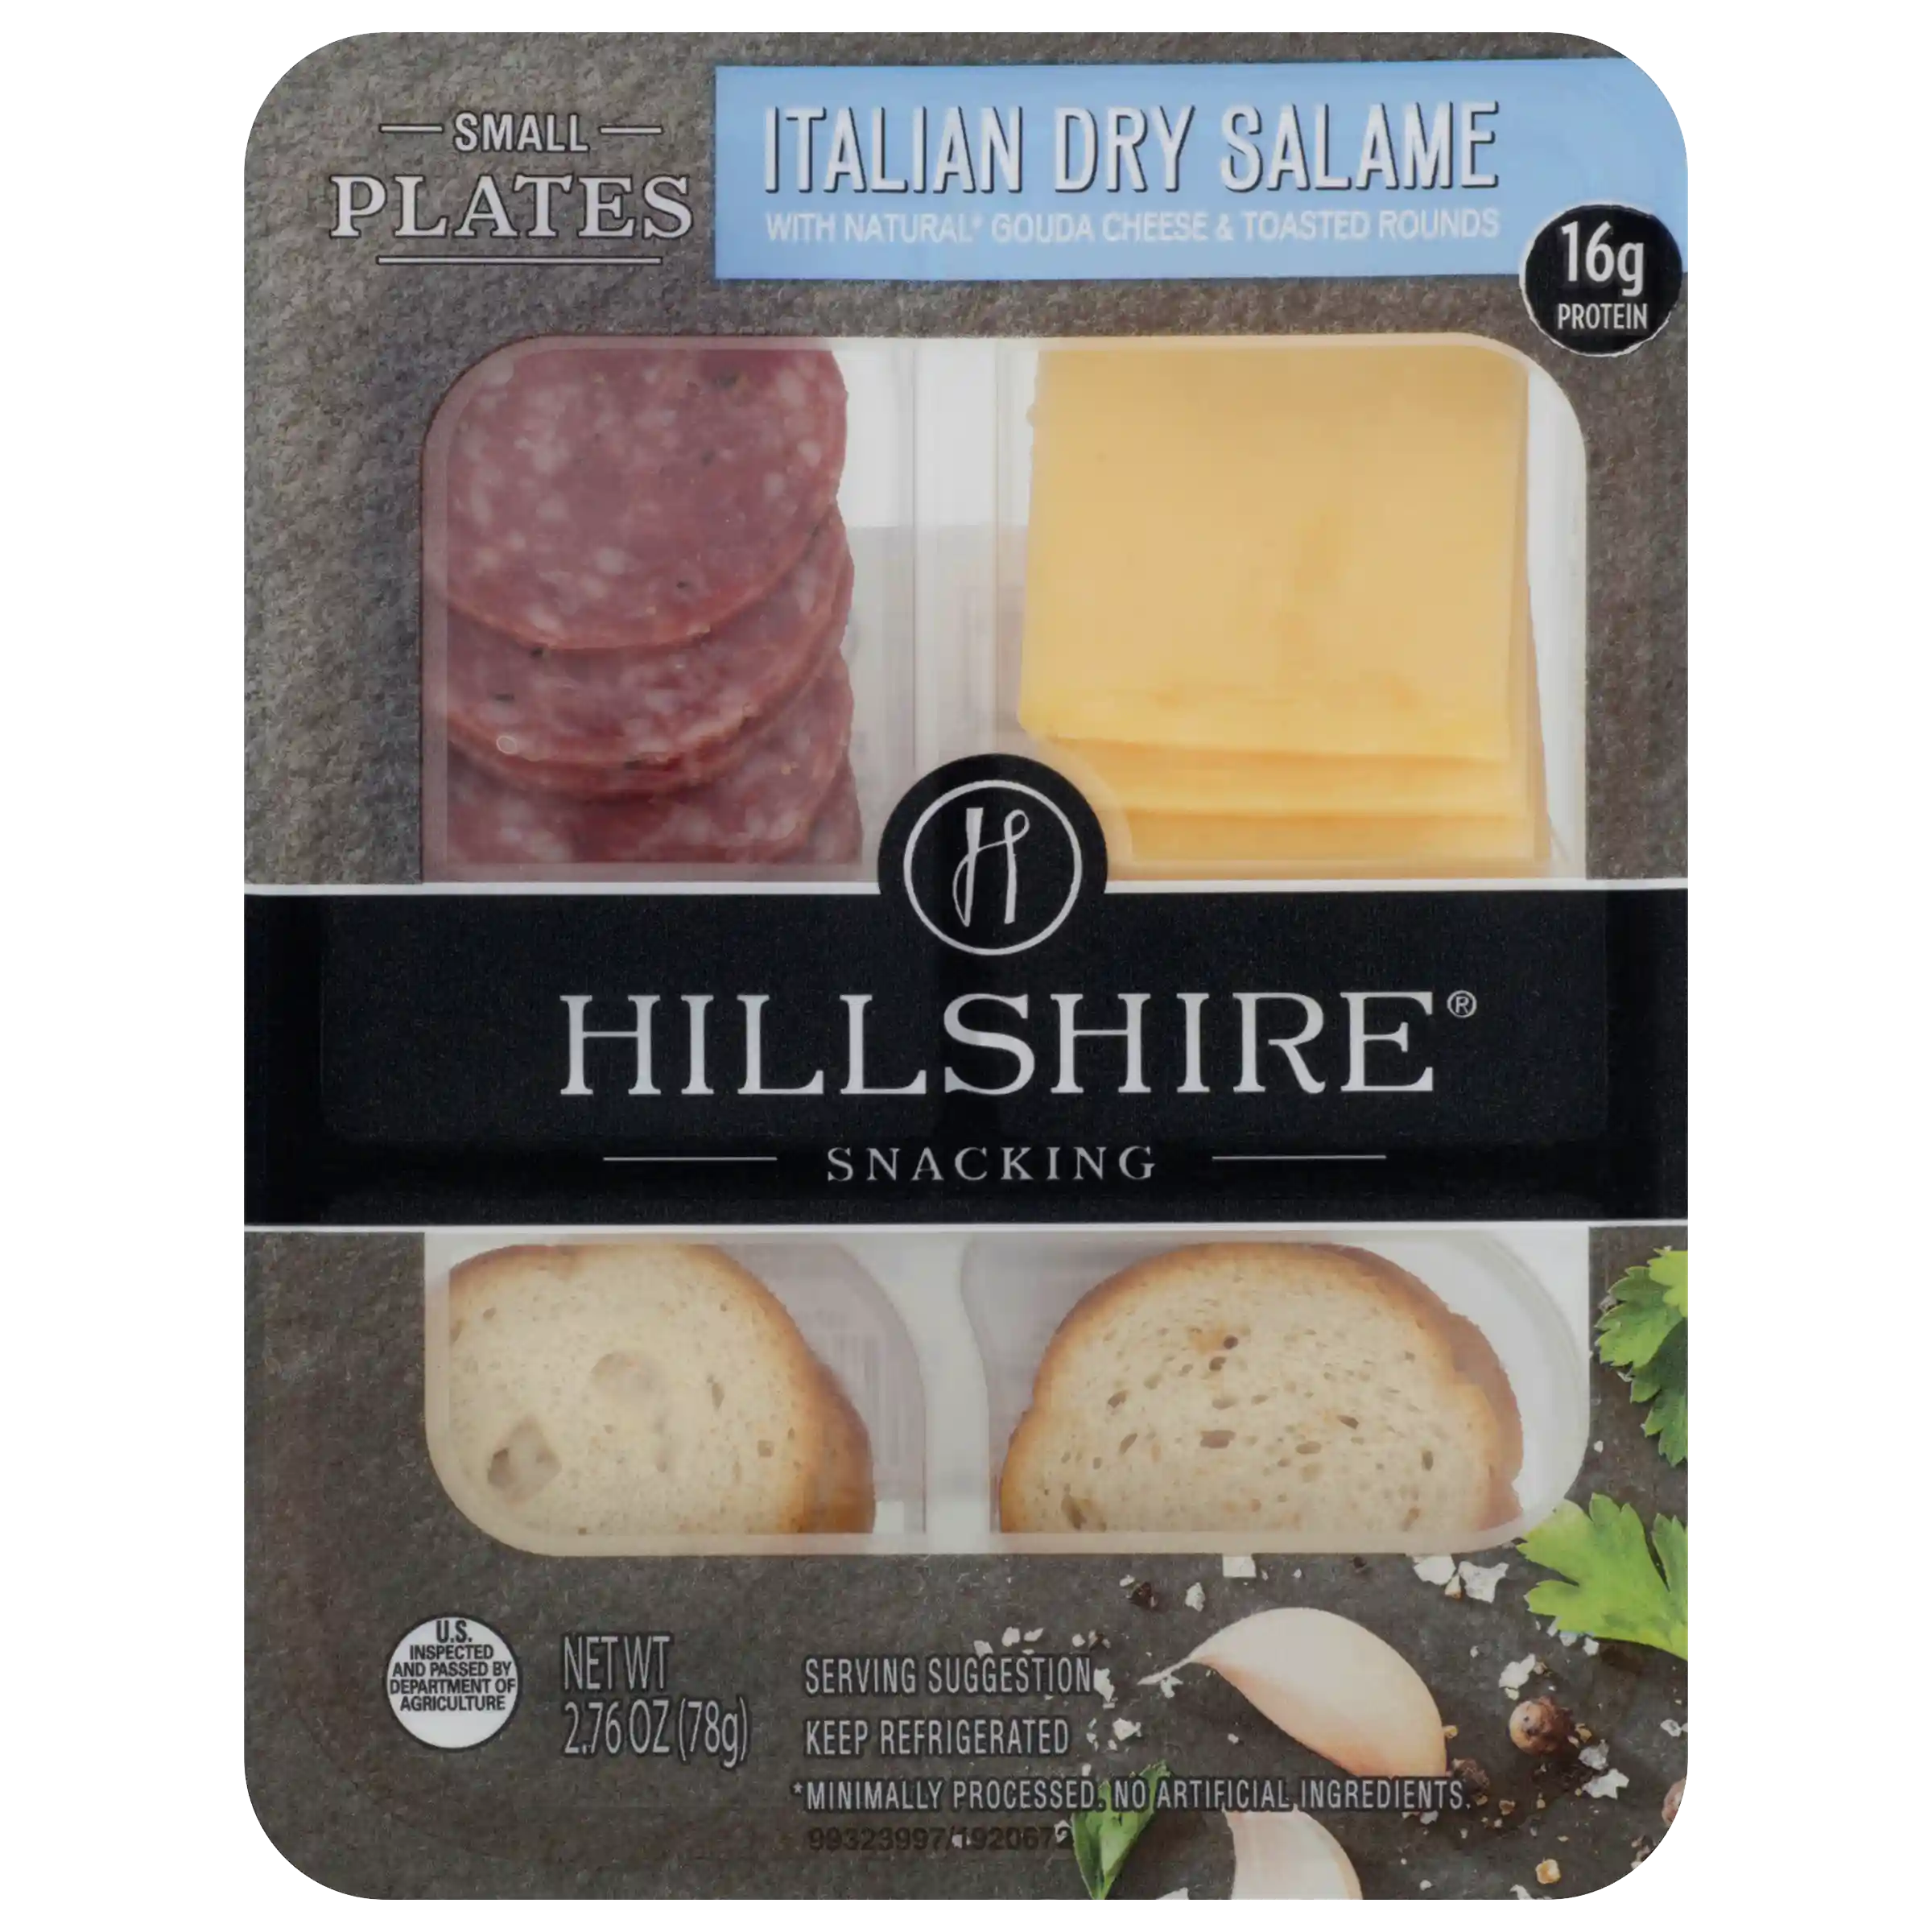 Hillshire® Snacking Small Plates, Italian Dry Salame Deli Lunch Meat and Gouda Cheese, 2.76 oz_image_11